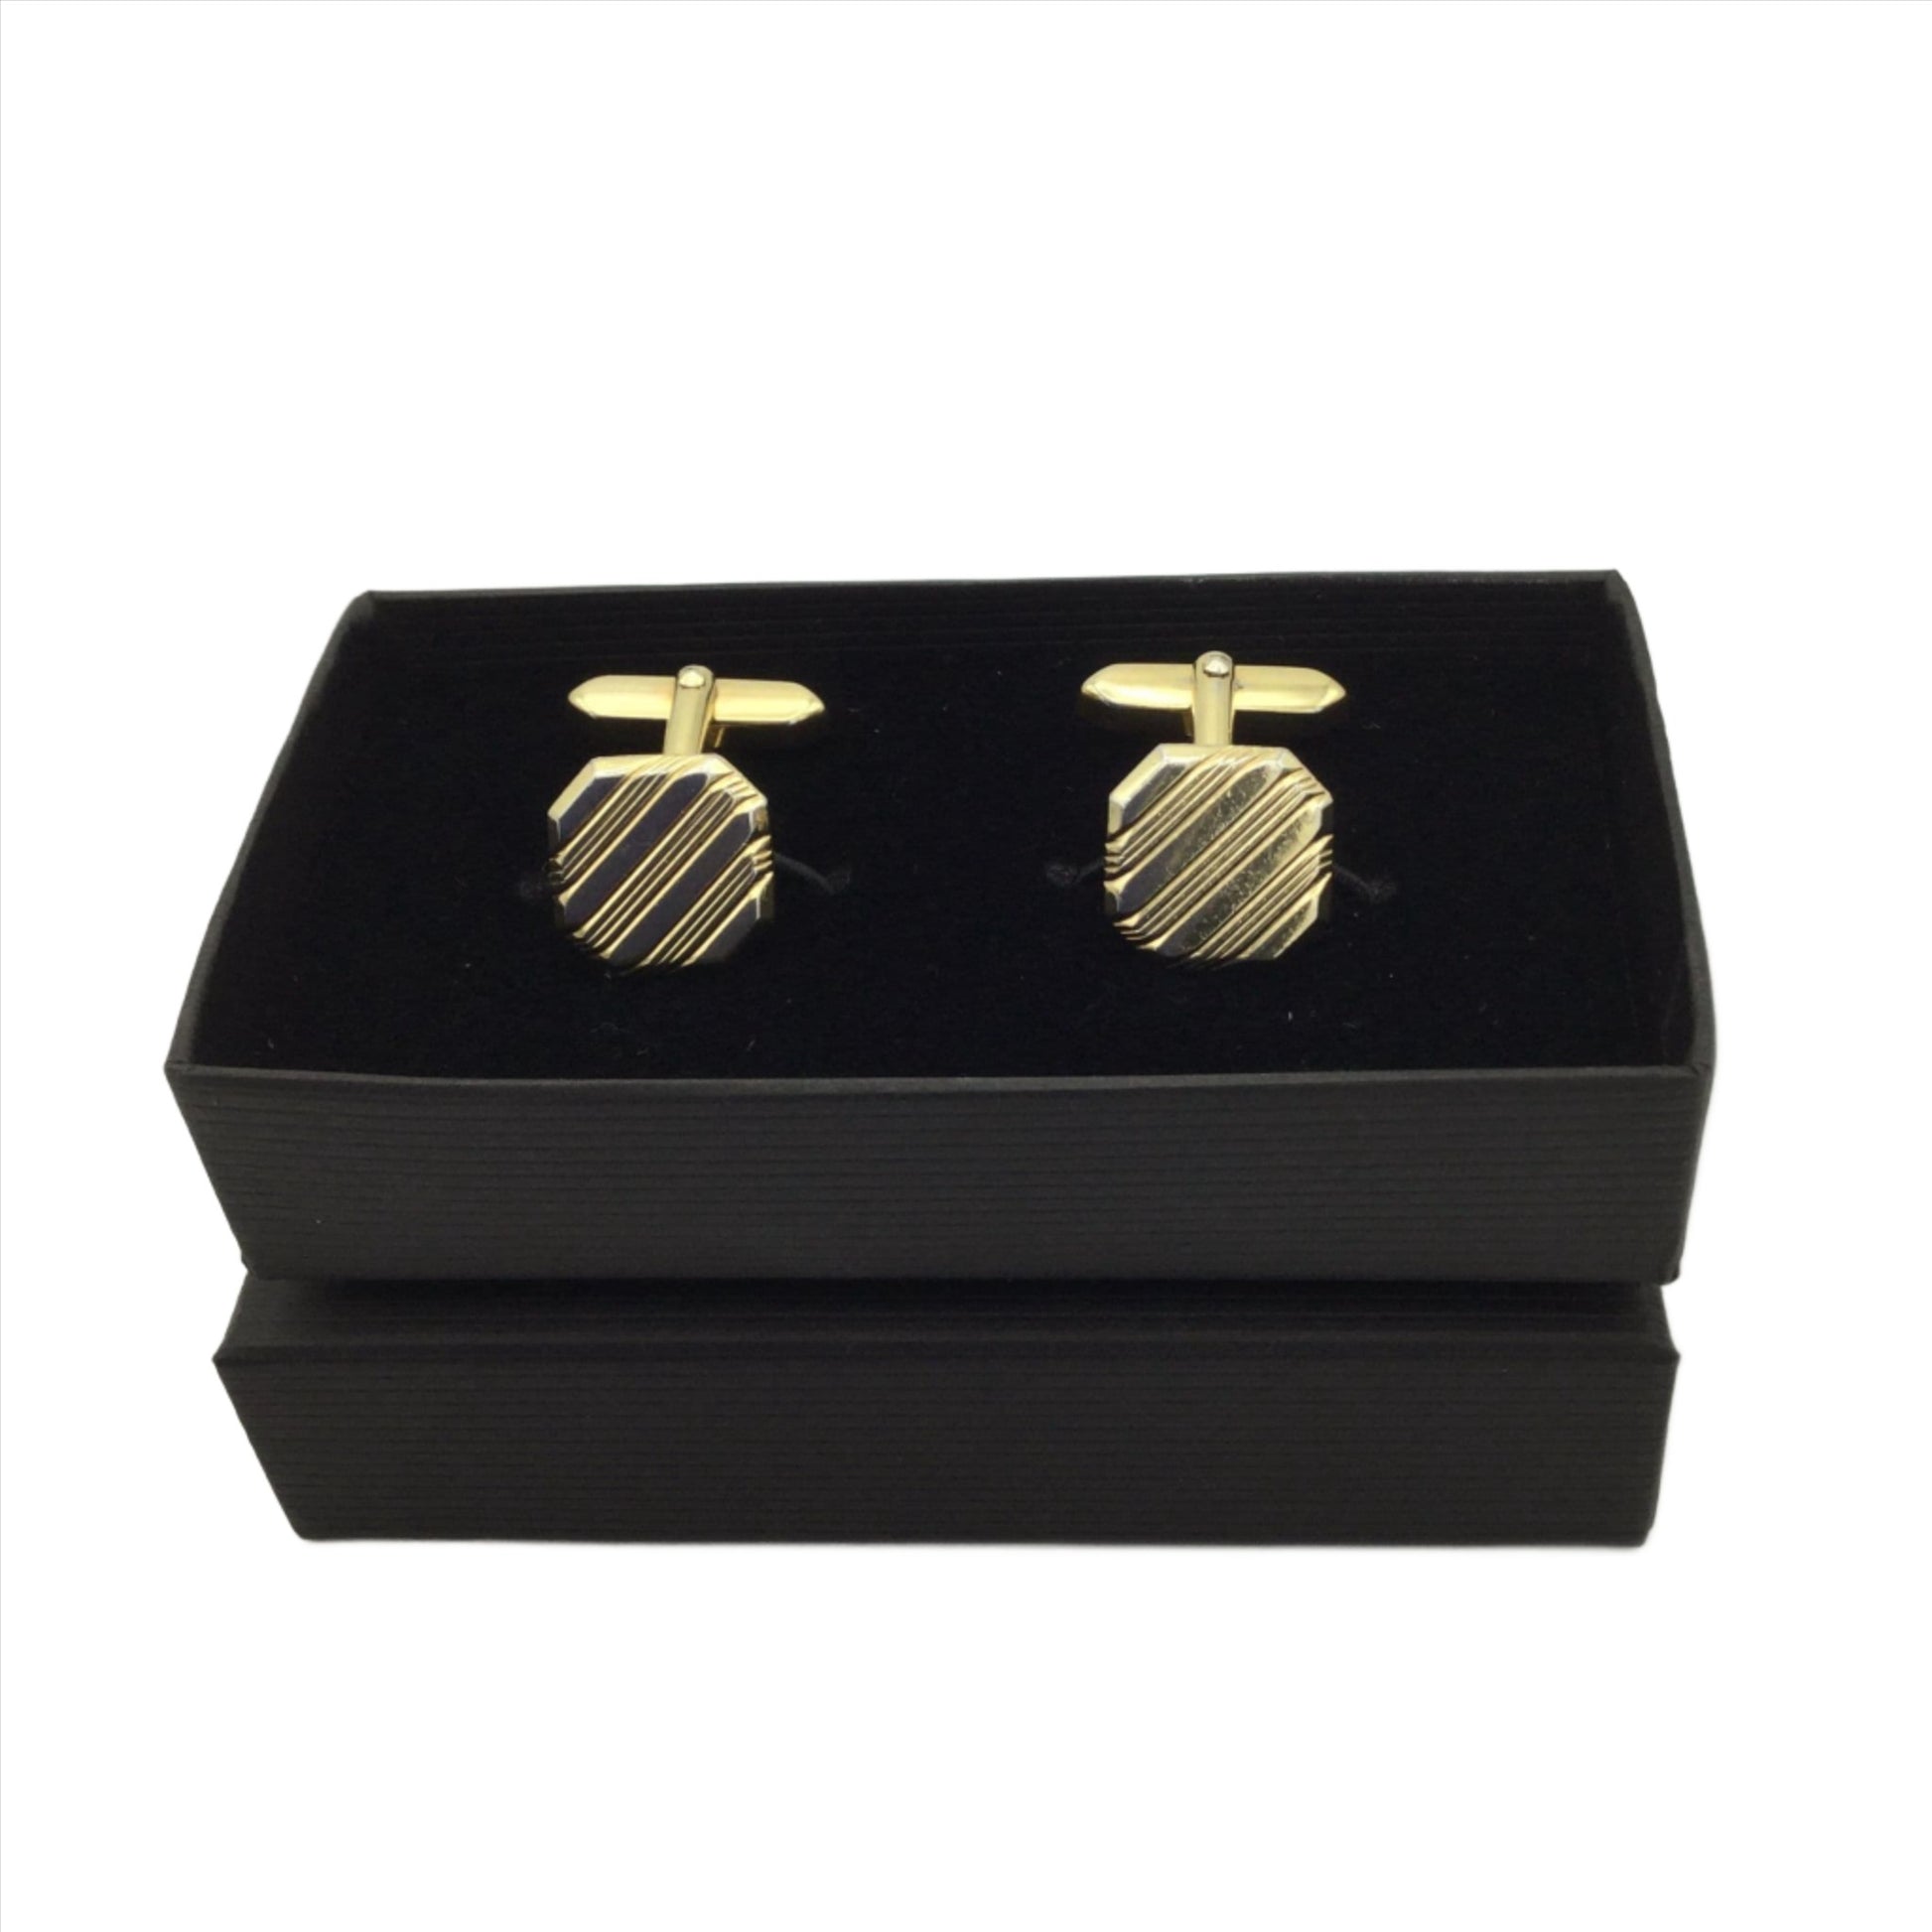 Gilded square cufflinks with a striped pattern in an open black box